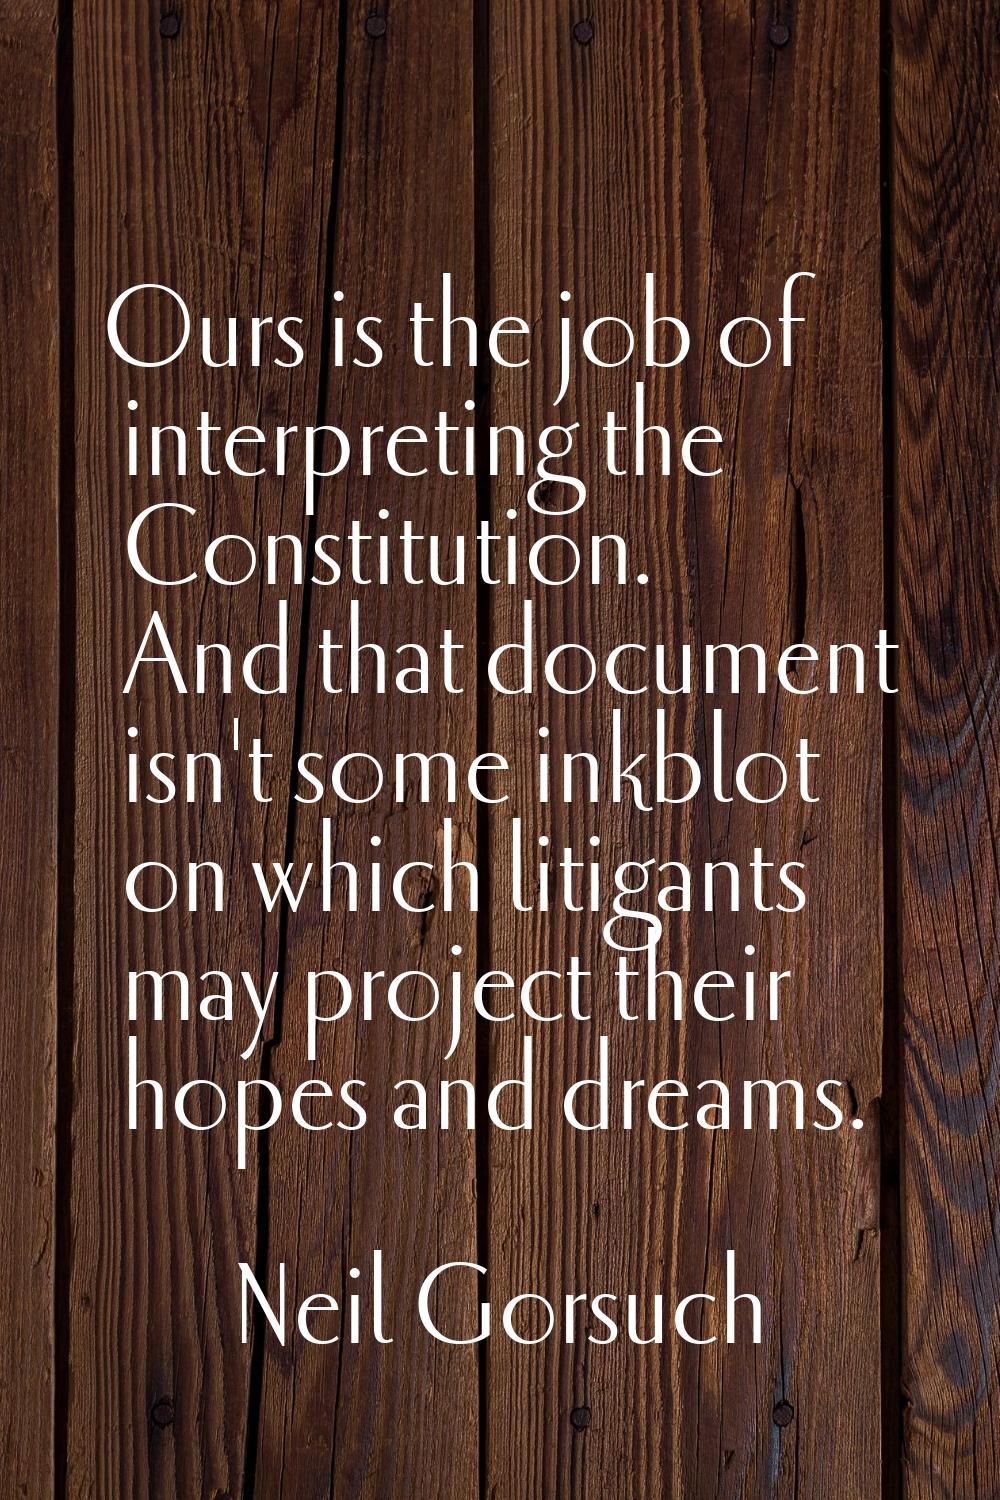 Ours is the job of interpreting the Constitution. And that document isn't some inkblot on which lit